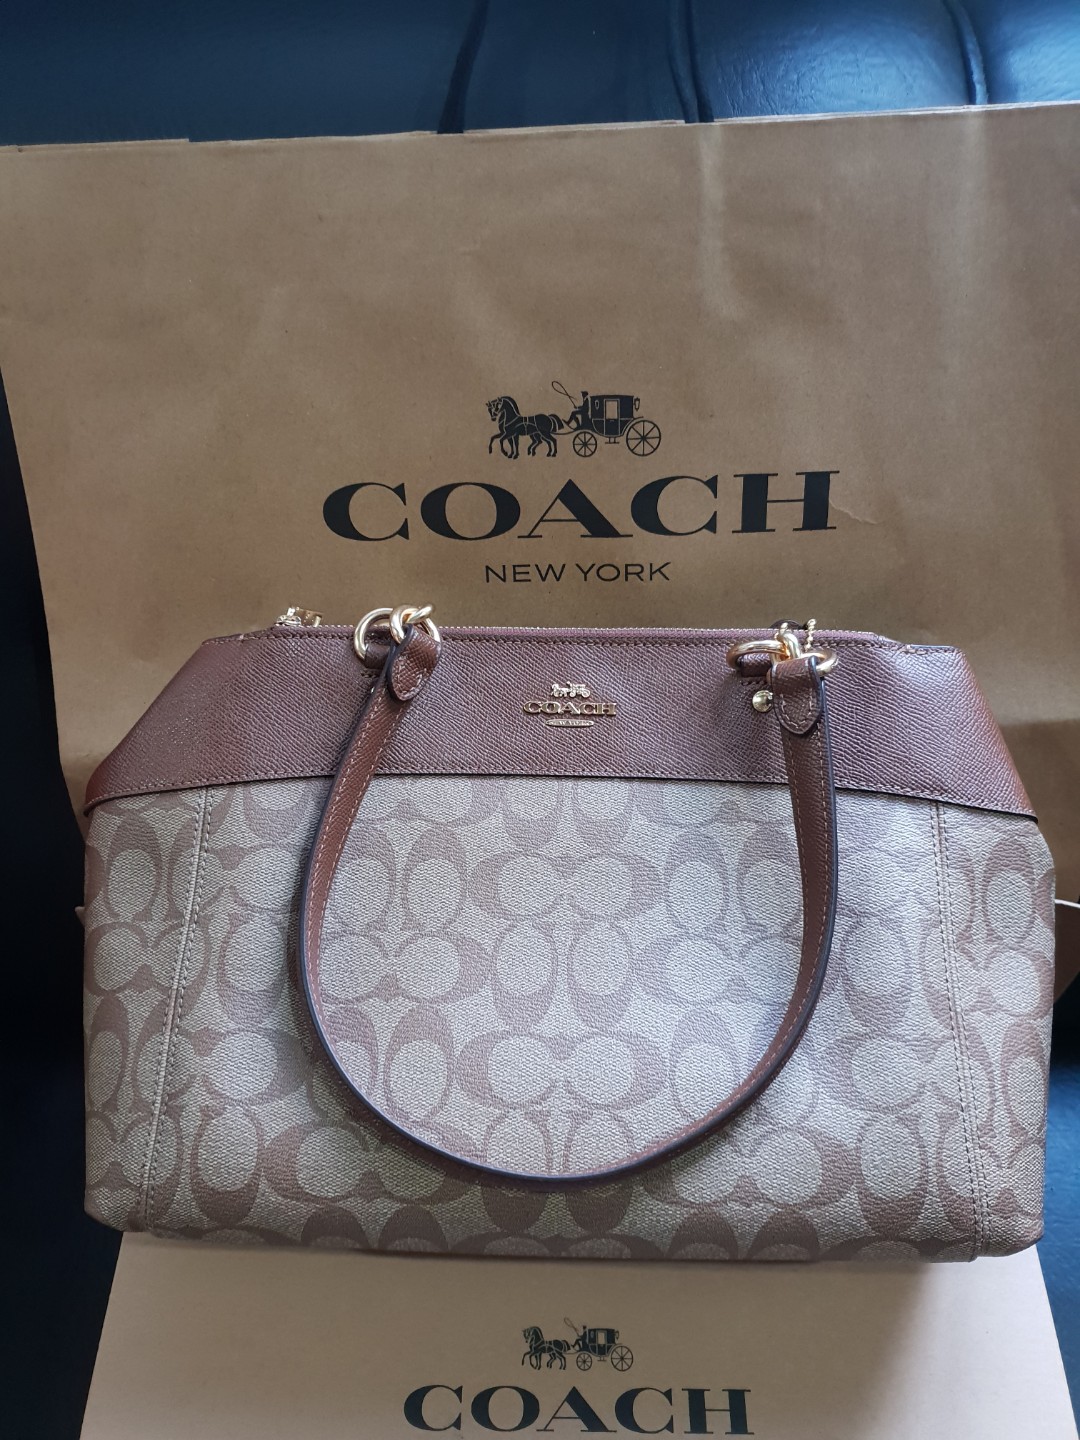 COACH BAG Original price $354.99(Php.18,100) NOW!! PHP.10,000 FREE SHIPPING  PHILIPPINES 😘 100% ALL LEGIT ORIGINALS😘😘 MONEY BACK QUARANTEE IF PROVEN  FAKE. ON HAND by Yours Truly😊 U.S PURCHASE, Luxury, Bags & Wa